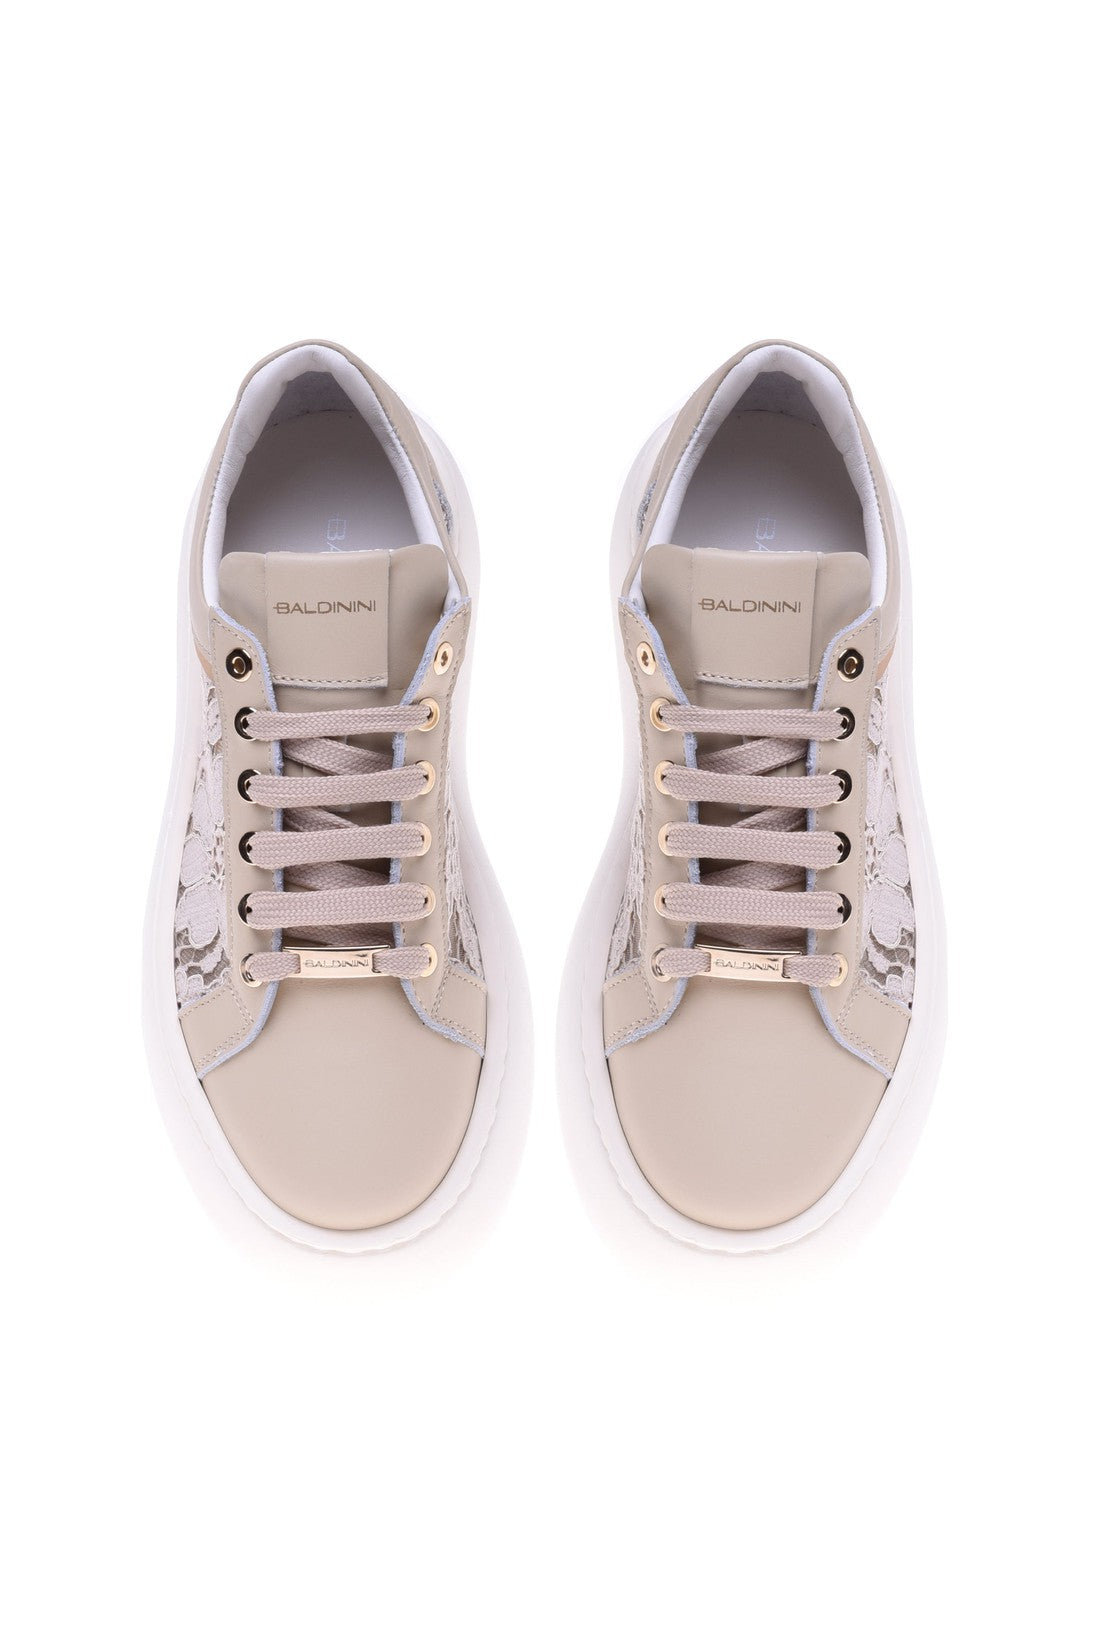 BALDININI-OUTLET-SALE-Sneaker-in-beige-nappa-leather-and-lace-Sneaker-ARCHIVE-COLLECTION-2.jpg